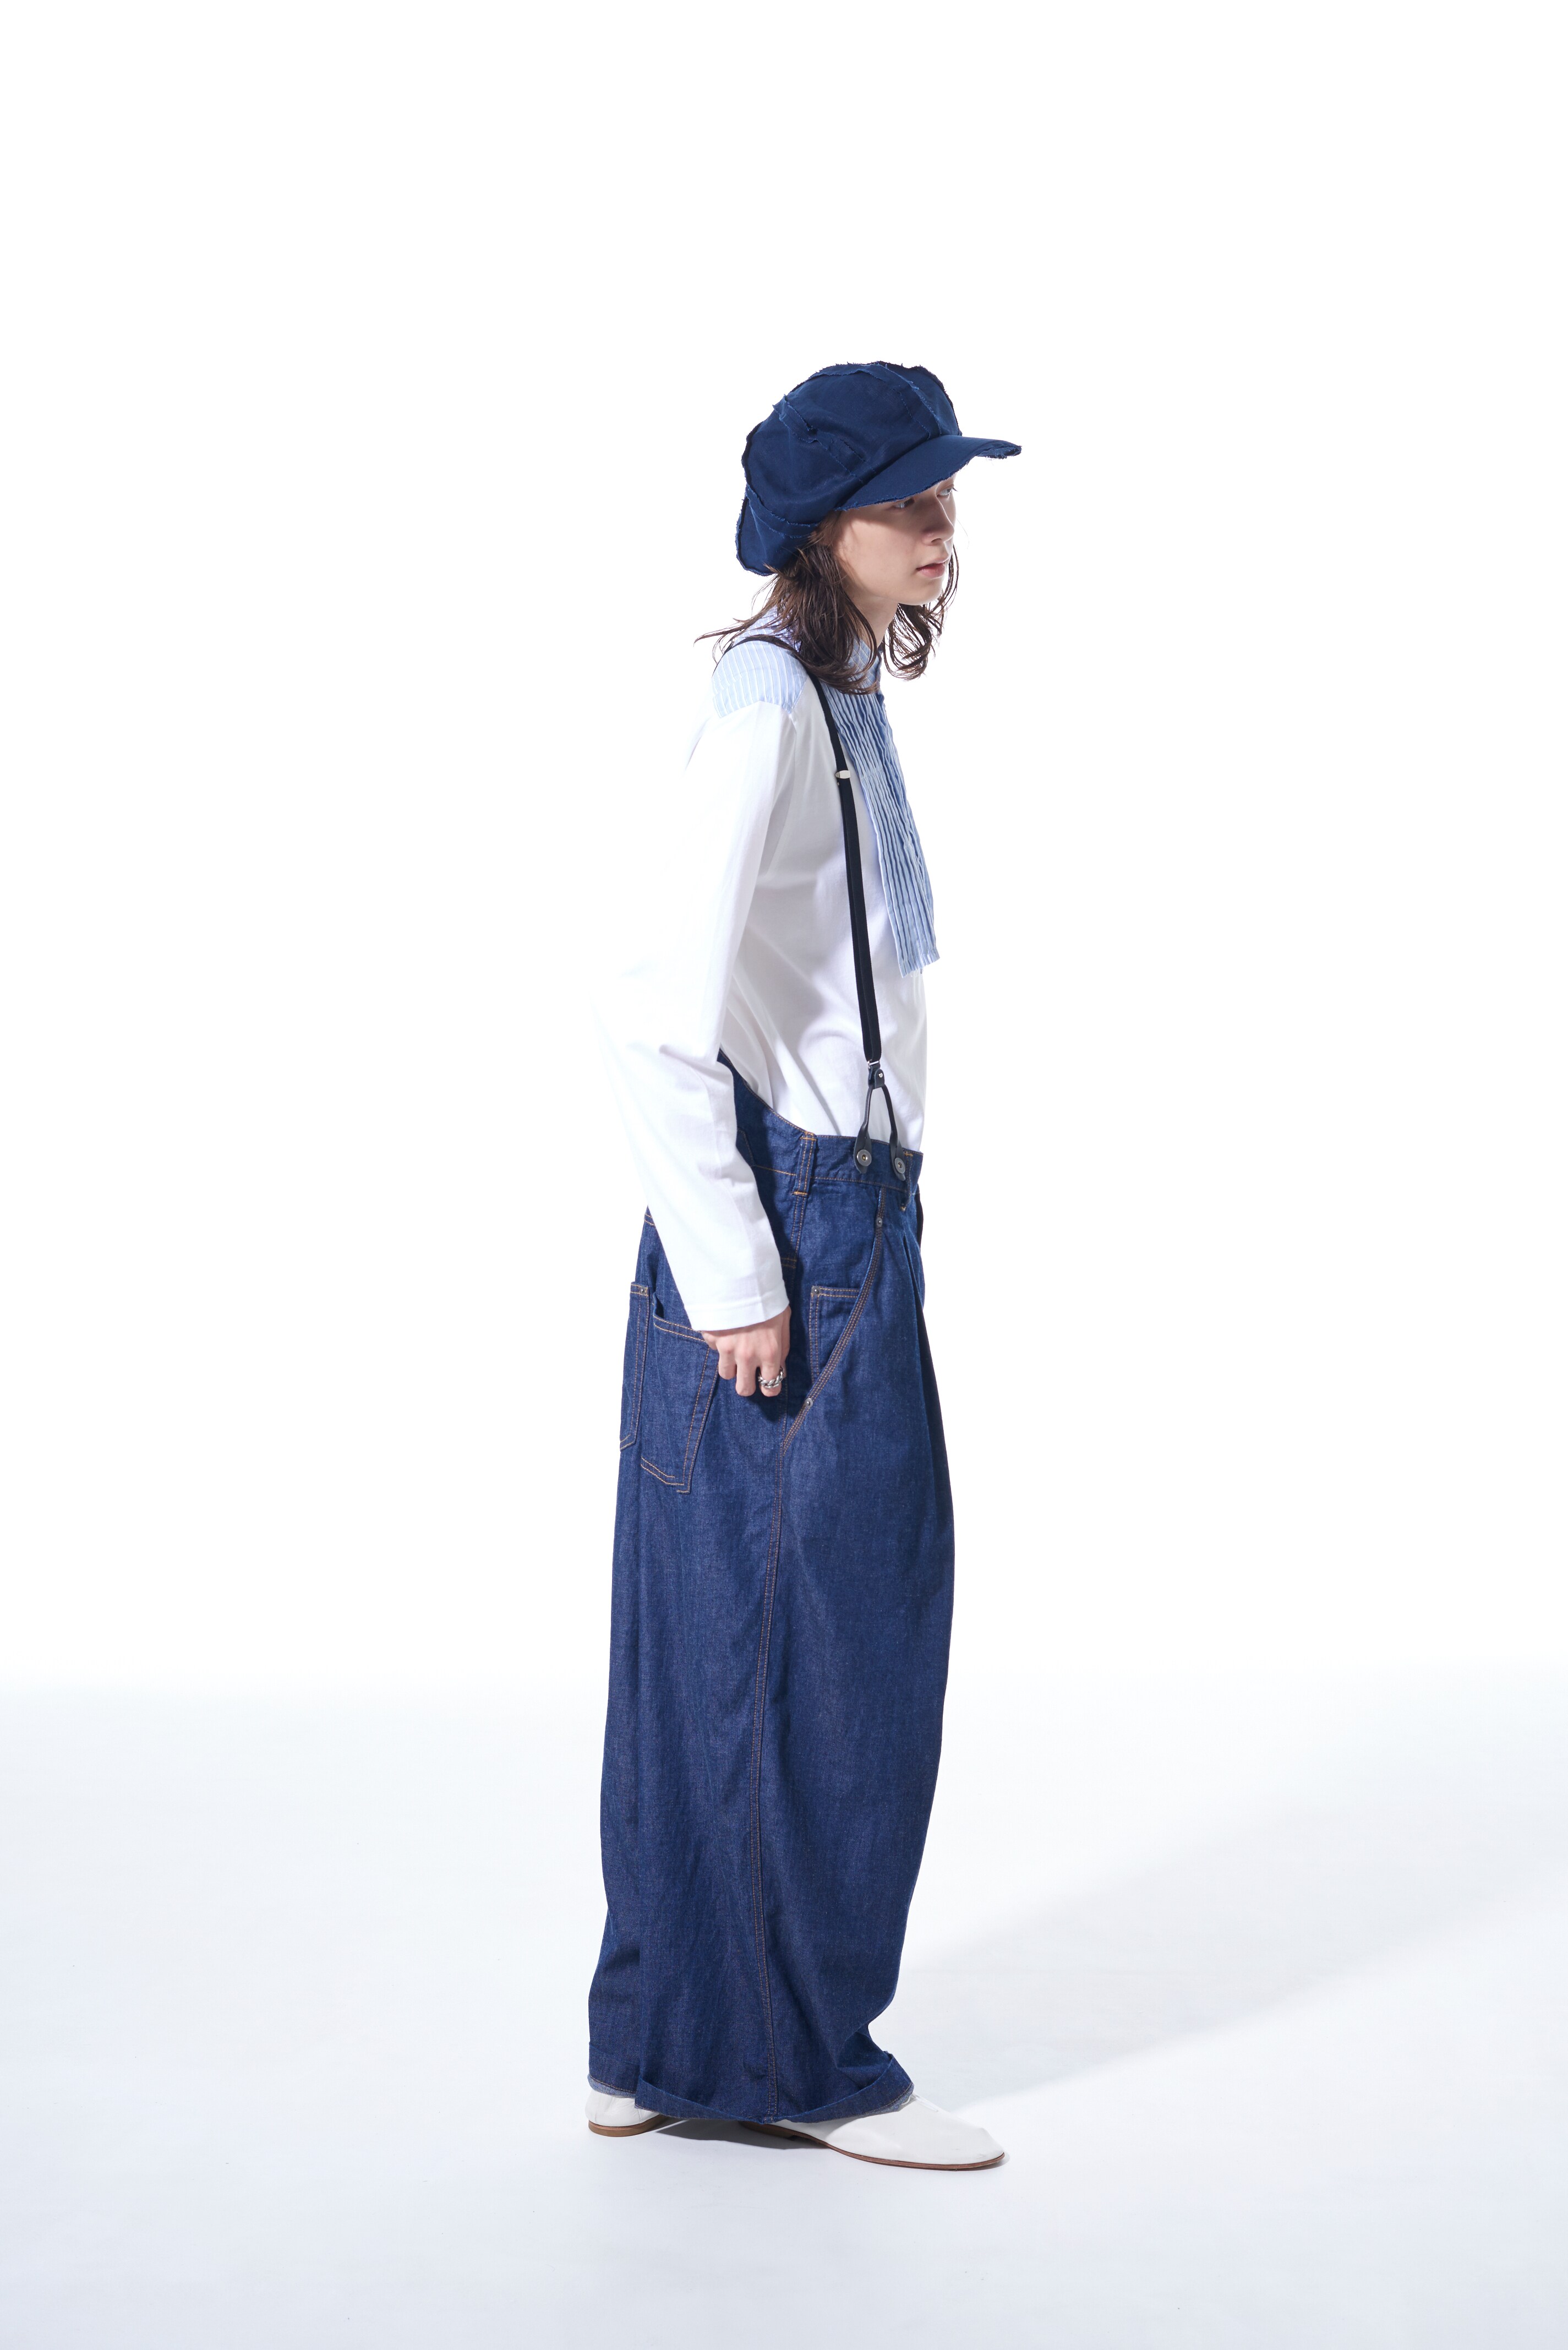 8OZ DENIM BUGGY PANTS WITH SUSPENDER BUTTONS